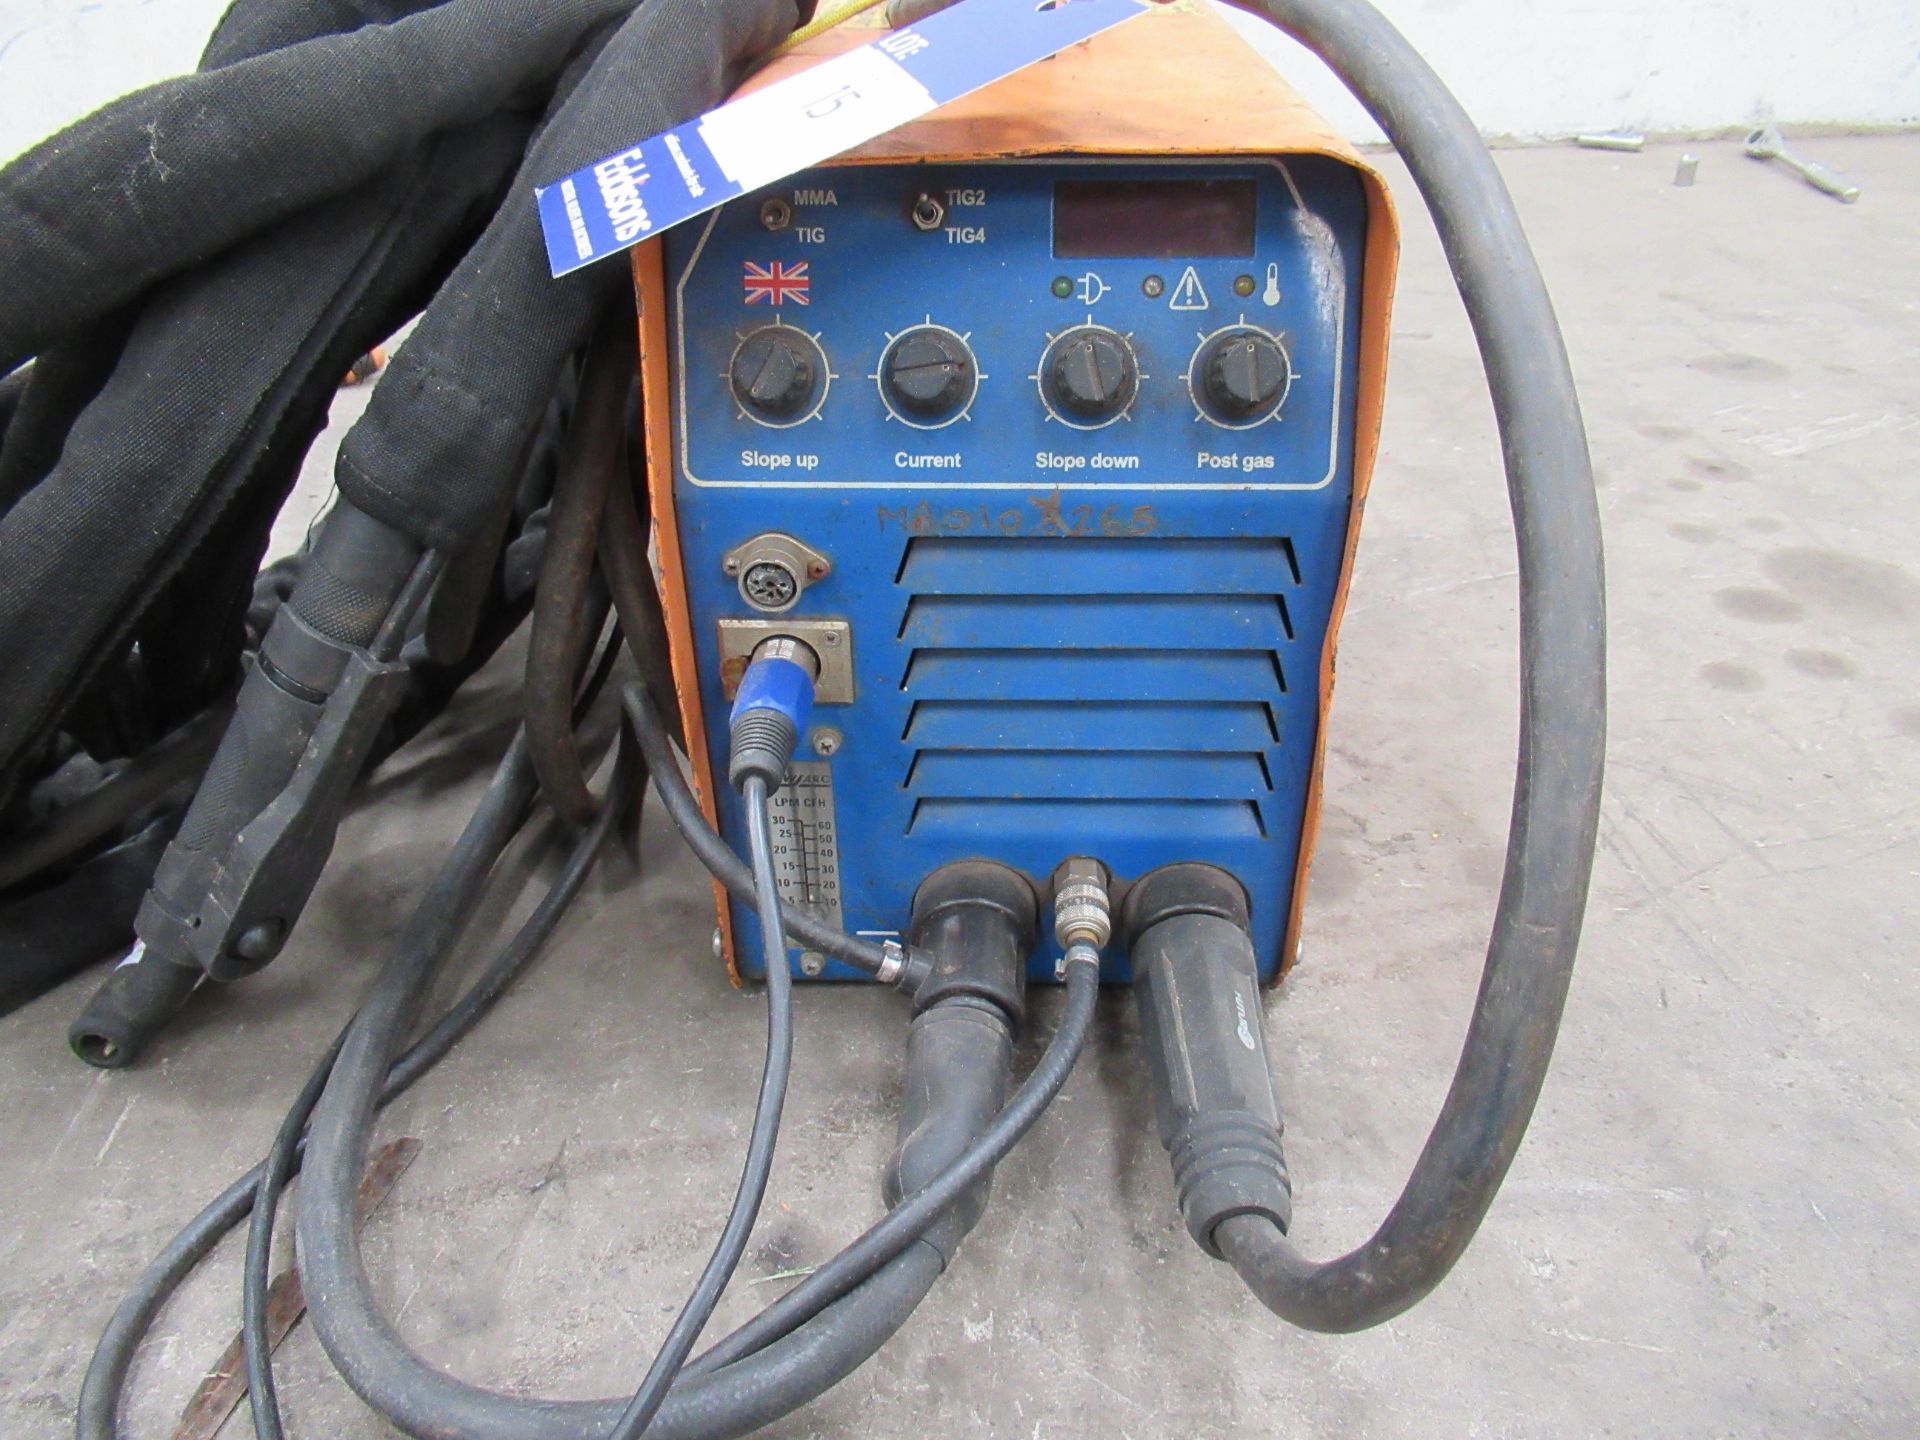 Newarc Viper 25005 tig welder with torch and leads